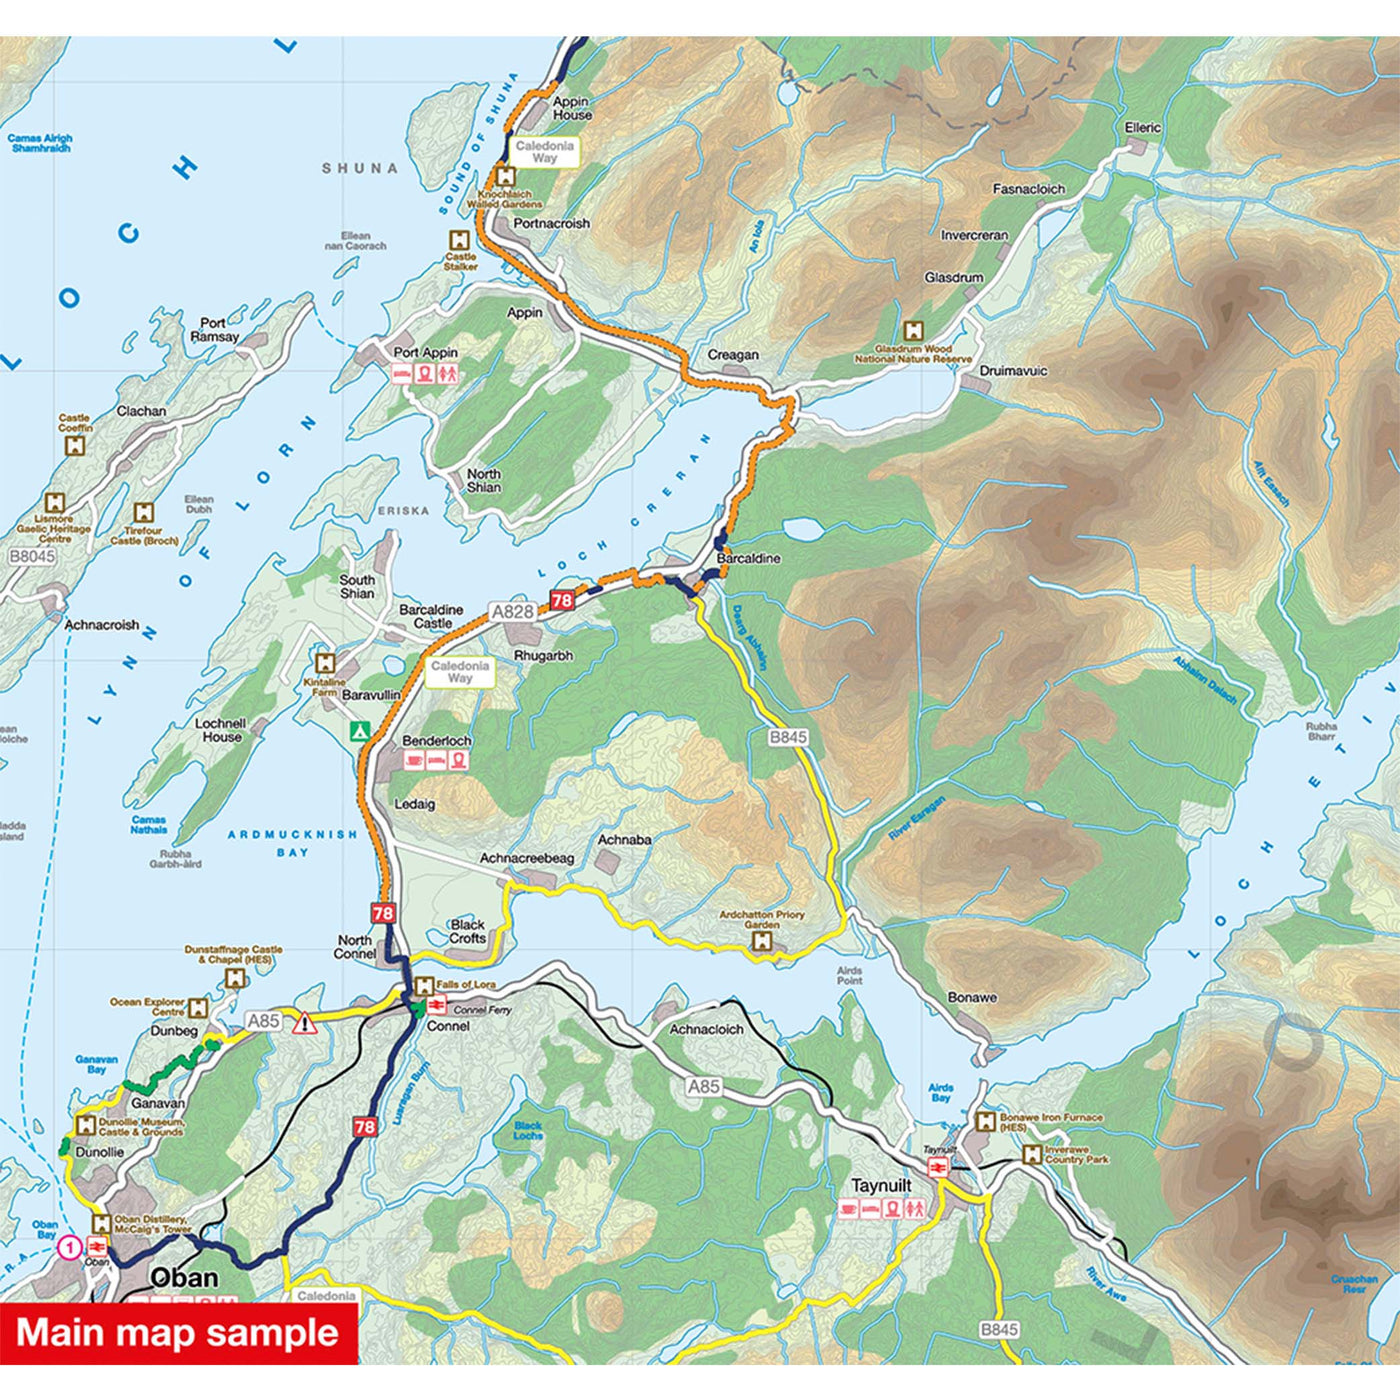 Main map sample of the Oban, Kintyre and the Trossachs cycle map